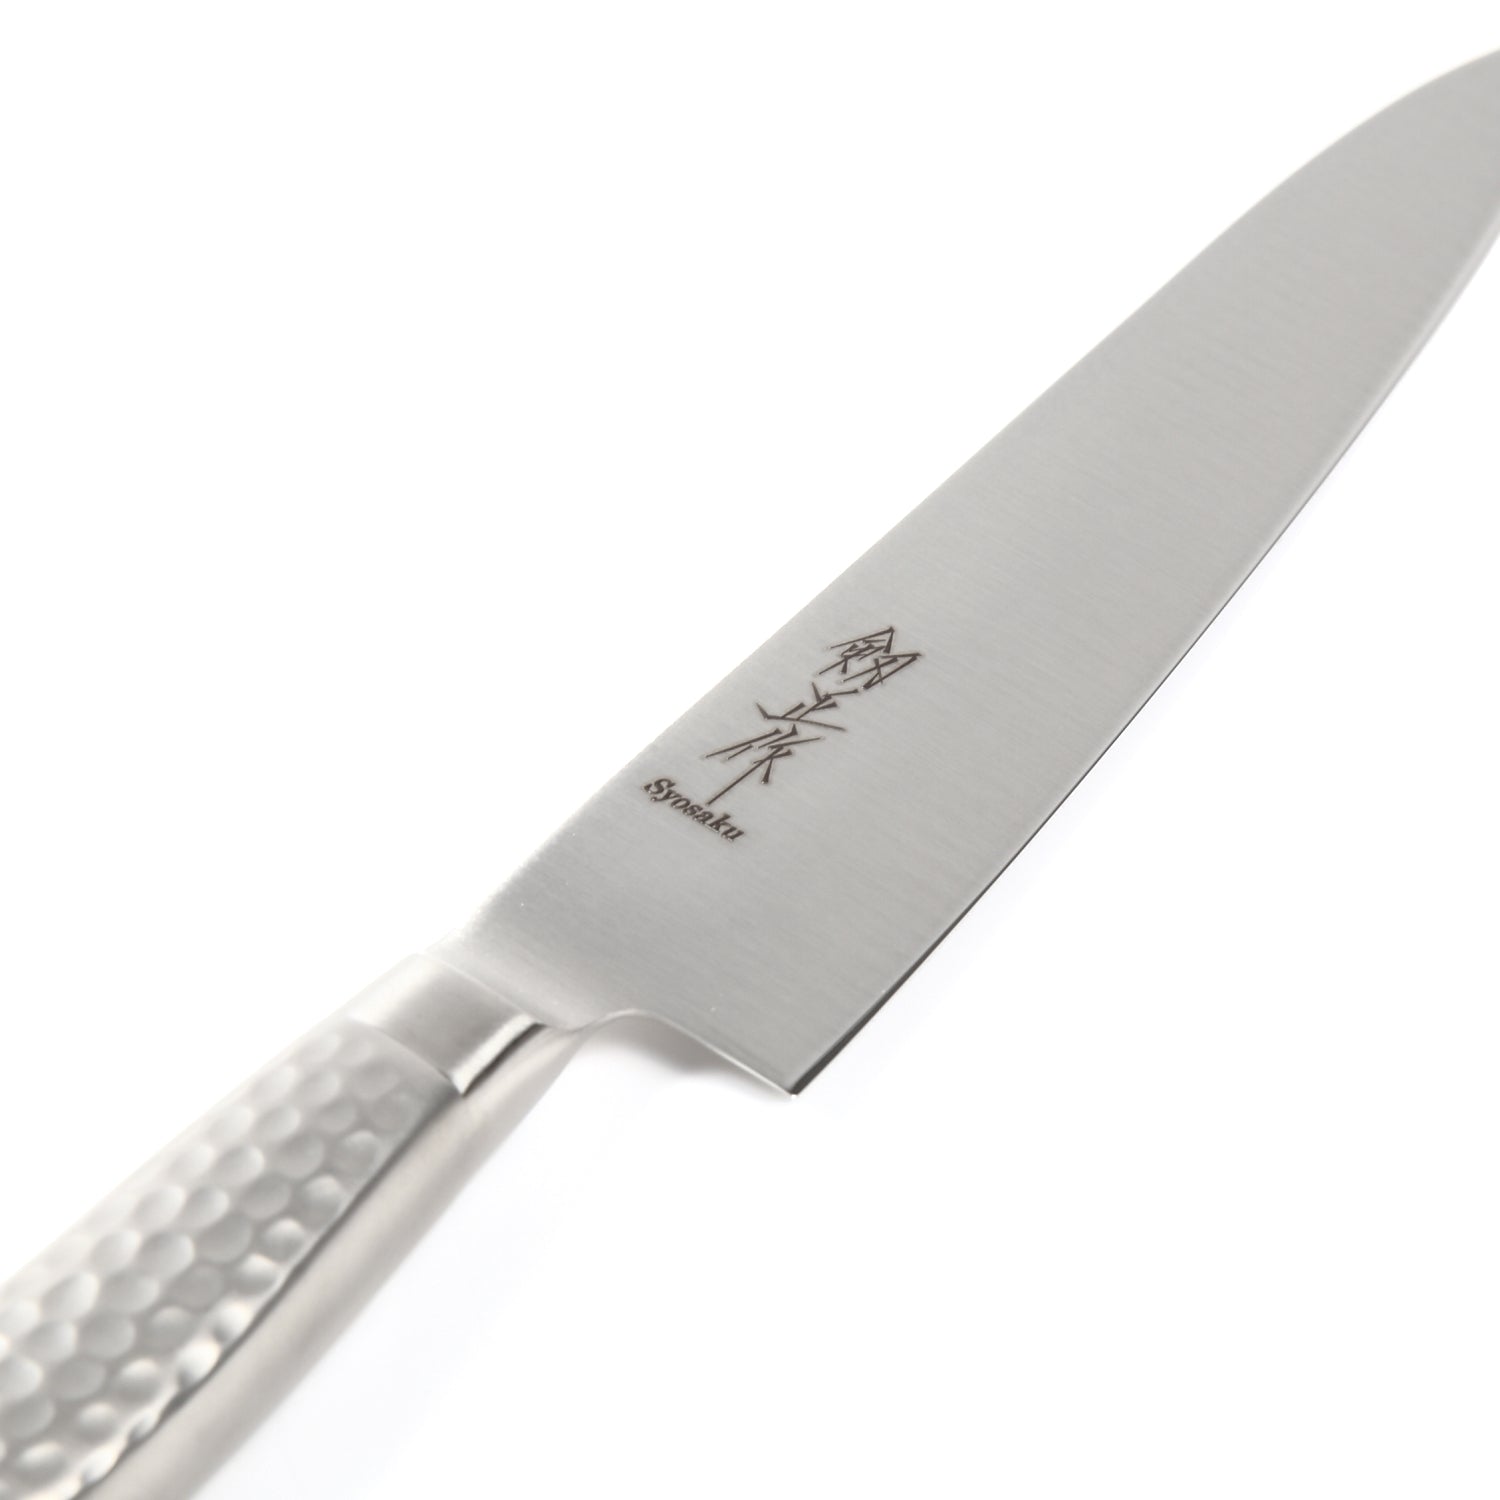 Syosaku Japanese Petty Knife INOX AUS-8A Stainless Steel Integrated Handle, 6-inch (150mm)